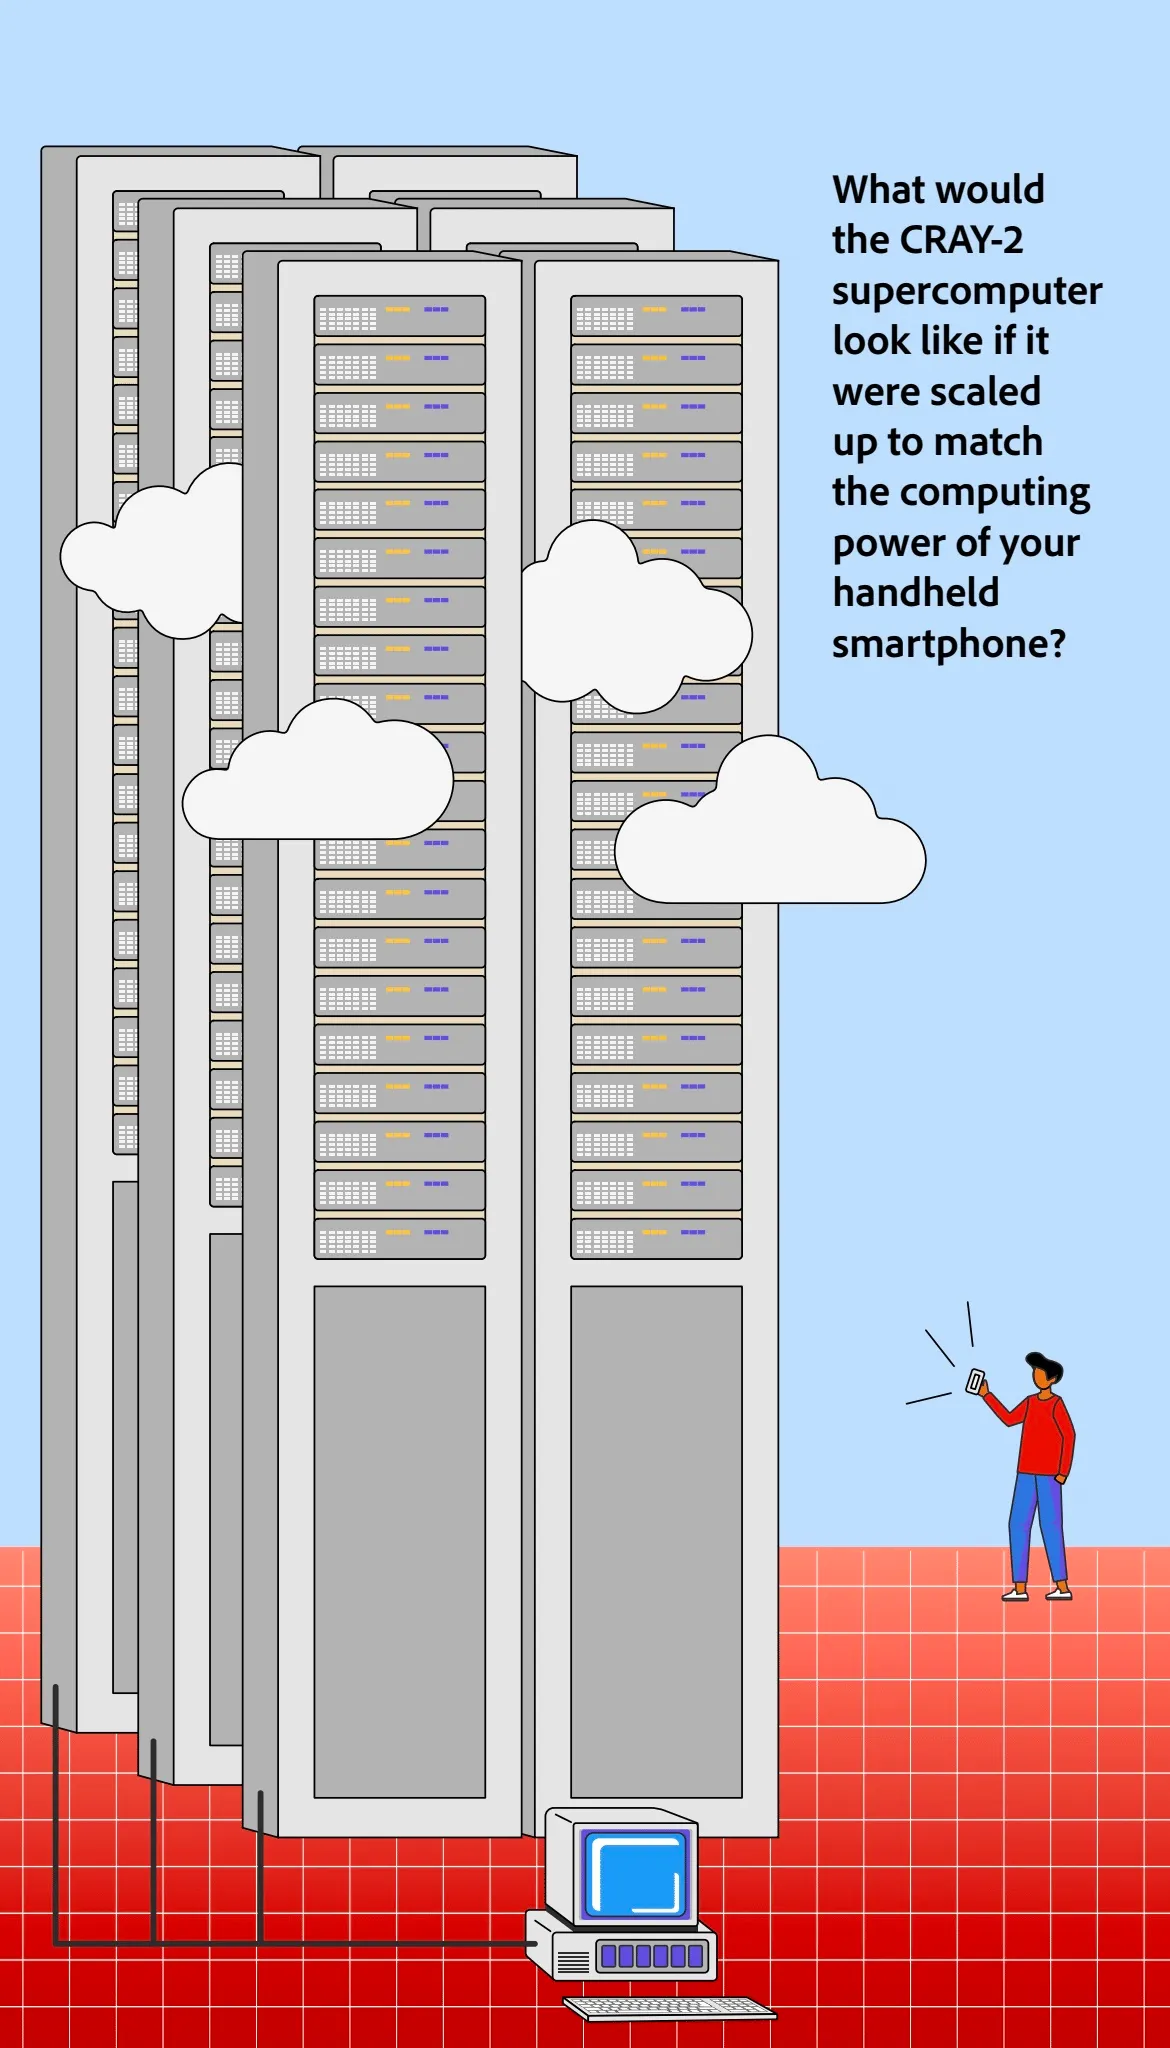 Graphic saying, What would the CRAY-2 supercomputer look like if it were scaled up to match the computing power of your handheld smartphone?